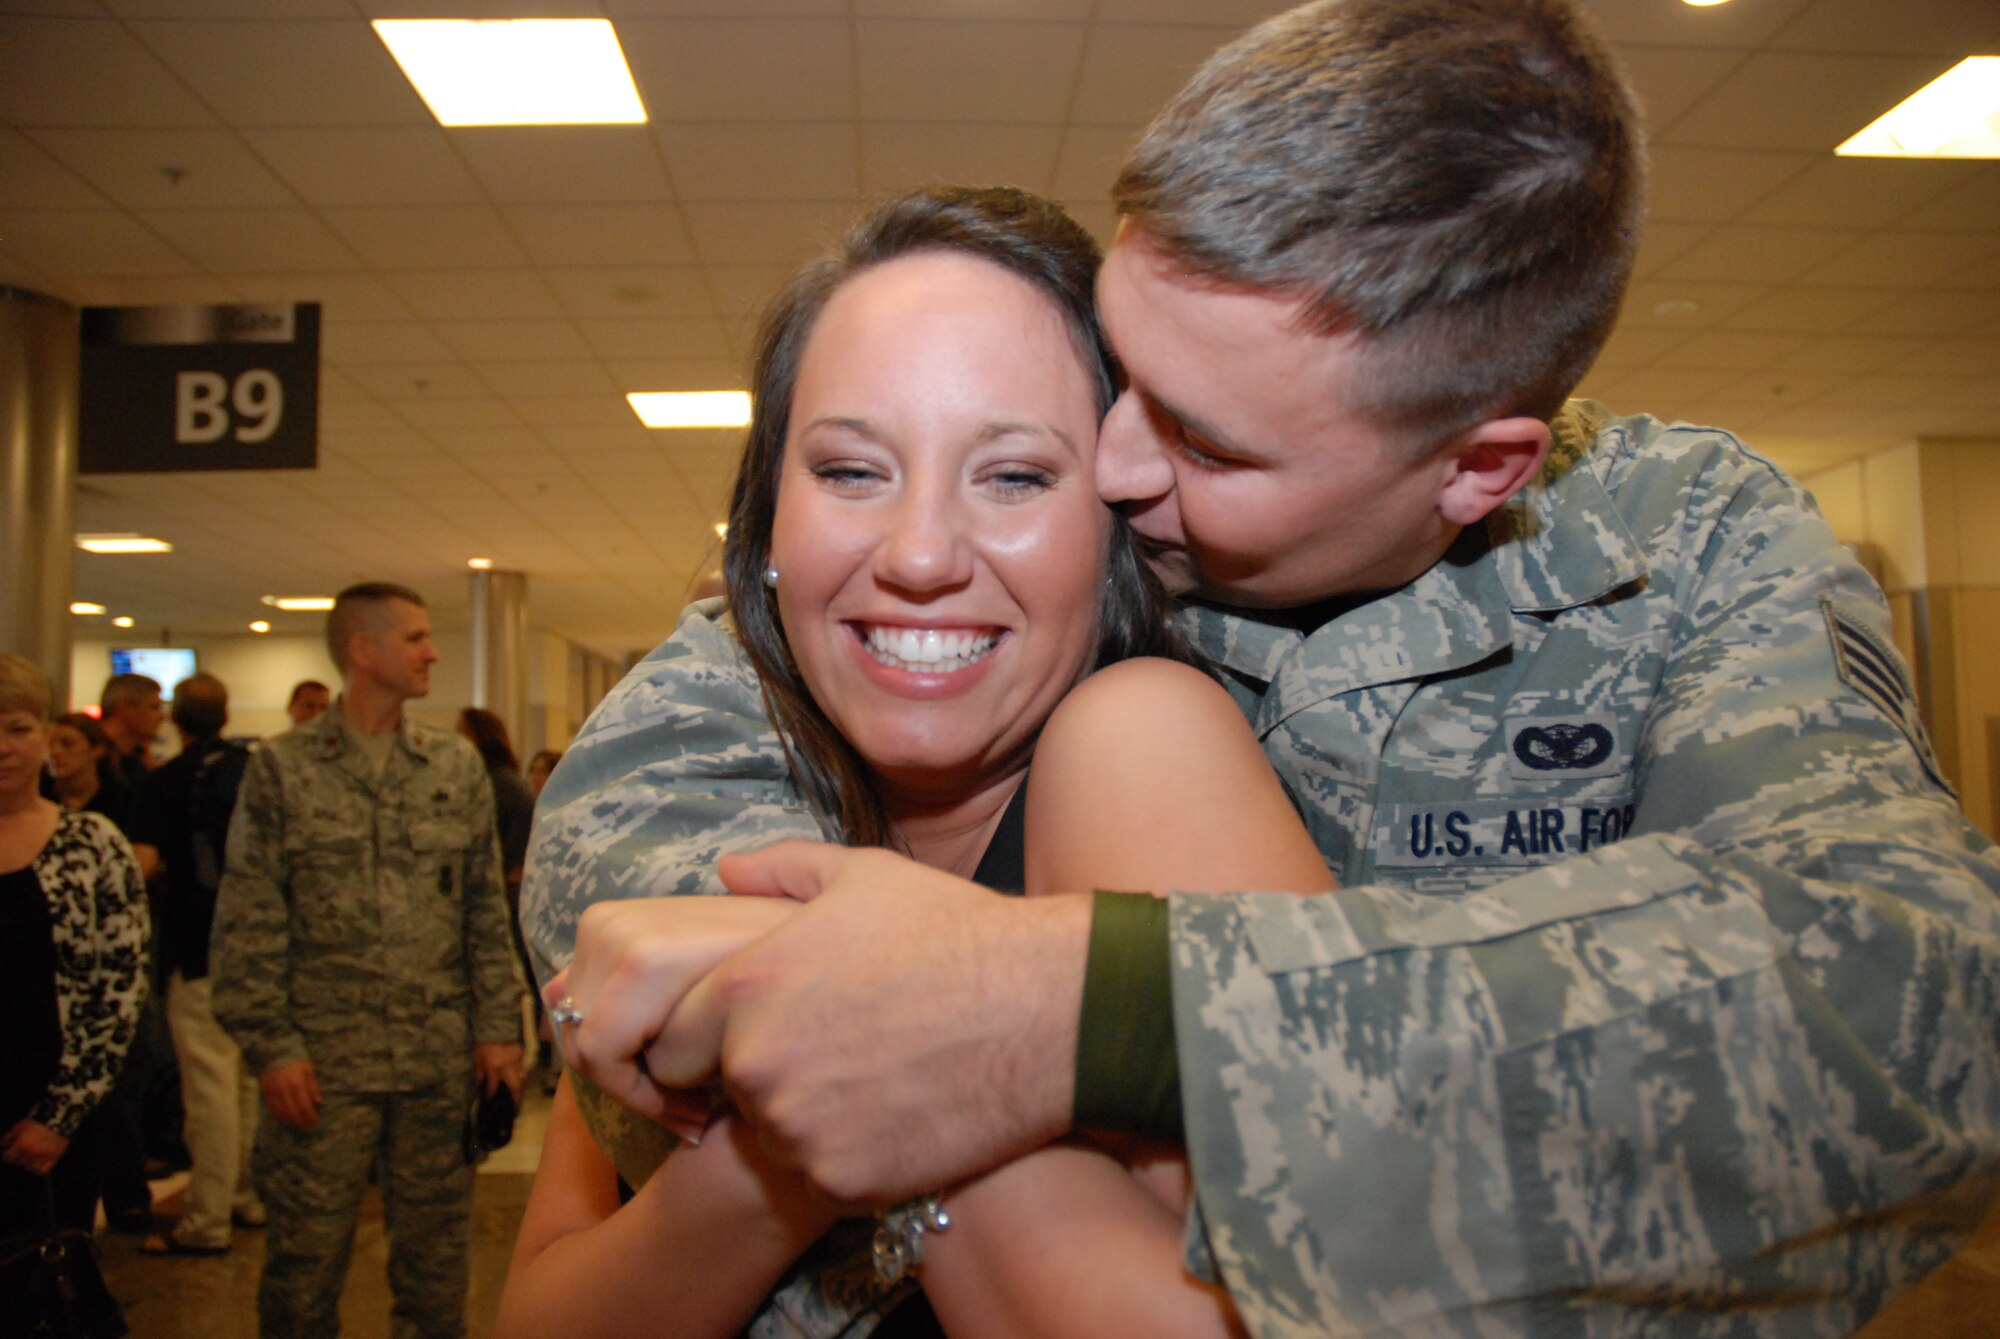 Senior Airman Russell Kuhlman, 94th Security Forces Squadron member, surprises girlfriend, McCalla Aragon, with a proposal at the Atlanta Hartsfield-Jackson Airport Jan. 5. Airman Kuhlman and other members of 94th SFS returned home after a six-month deployment to southwest Asia. (U.S. Air Force photo/Master Sgt. Stan Coleman)